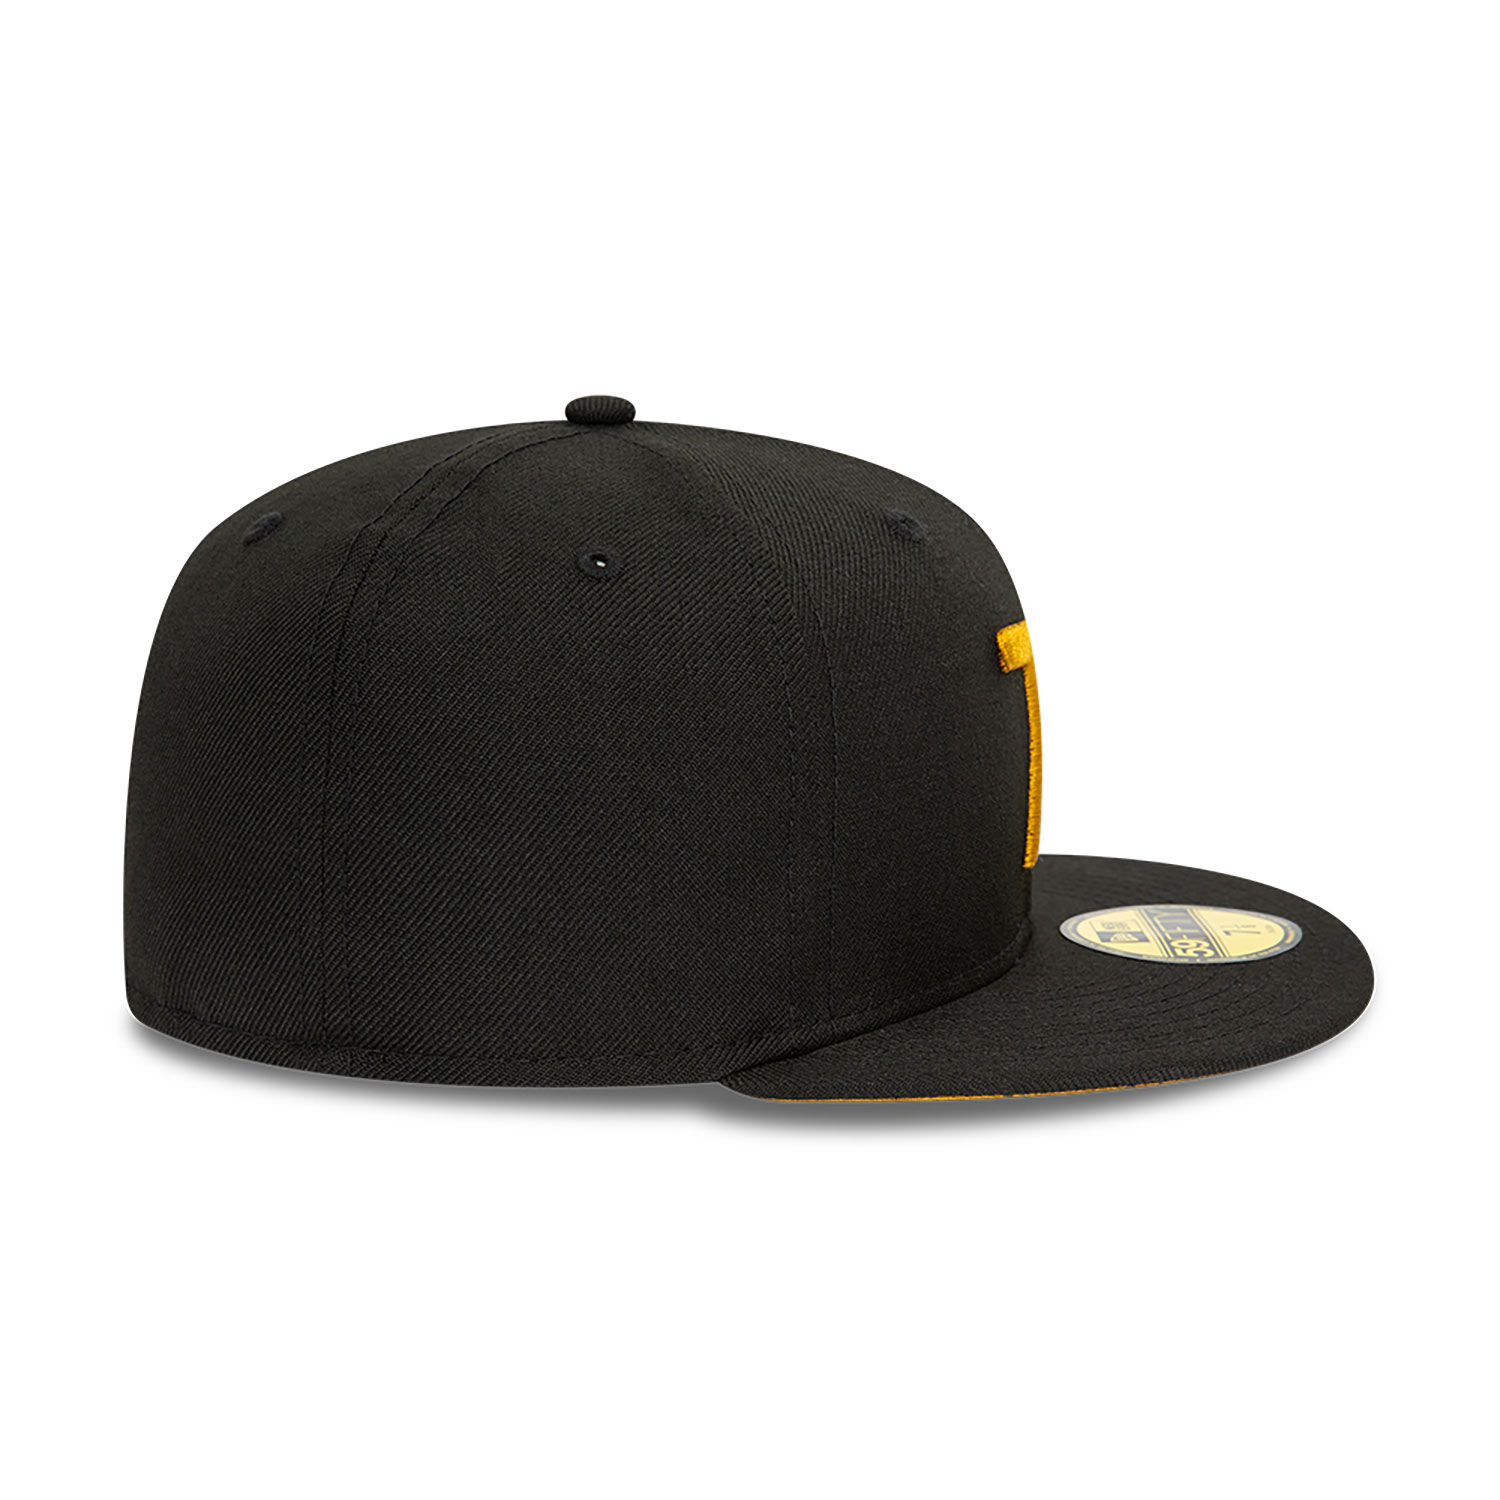 New Era 7 1/8 59FIFTY Black 59FIFTY Fitted Cap